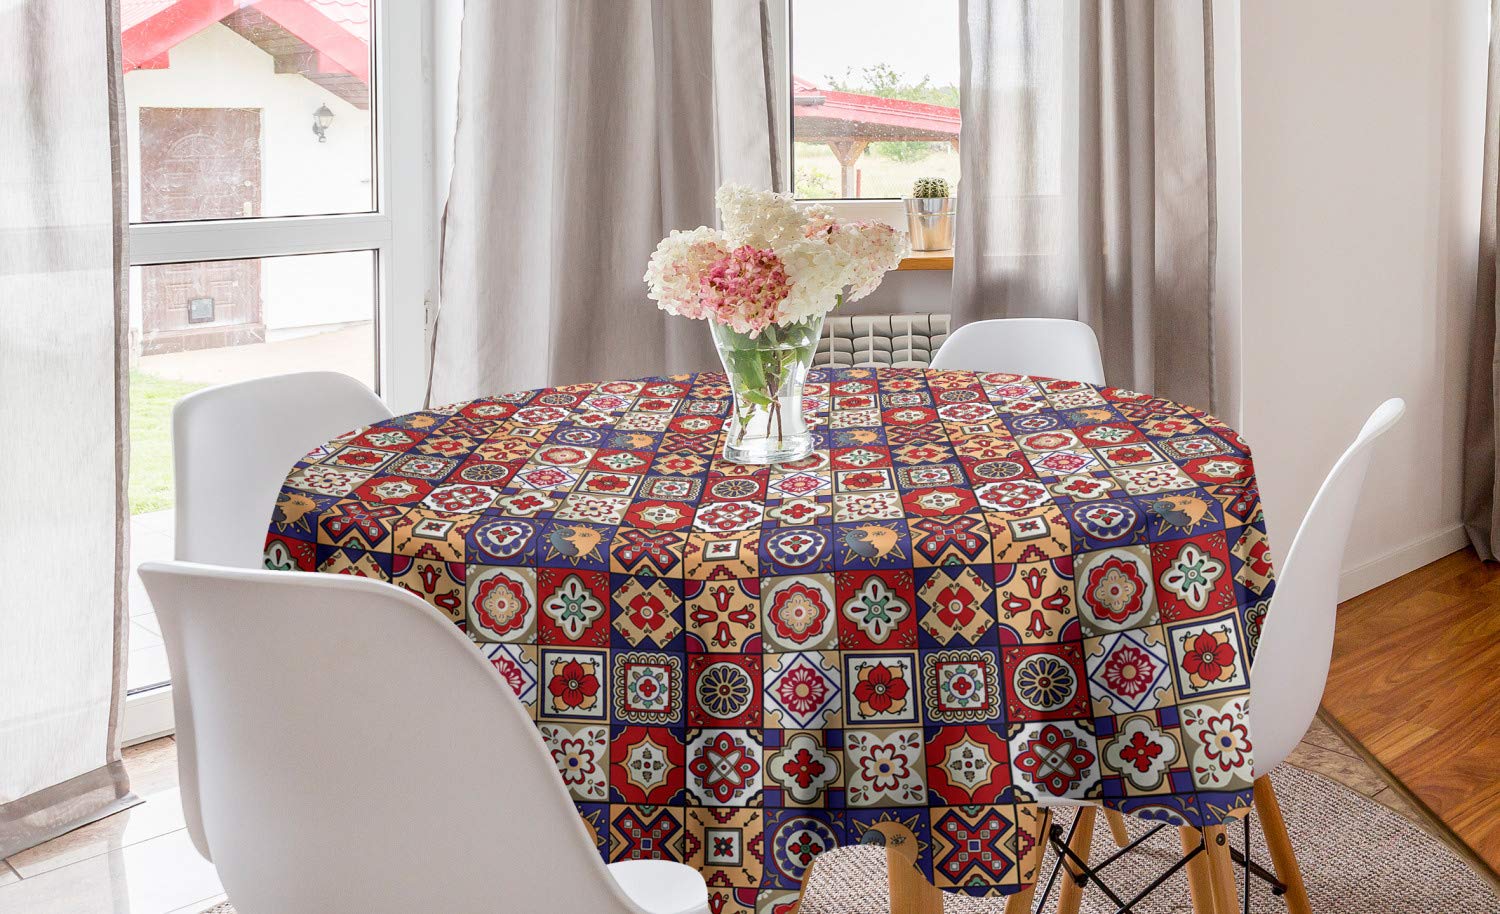 Lunarable Talavera Round Tablecloth, Vintage Style Spanish Floral Motifs Pottery Look Continuous Pattern, Circle Table Cloth Cover for Dining Room Kitchen Decoration, 60